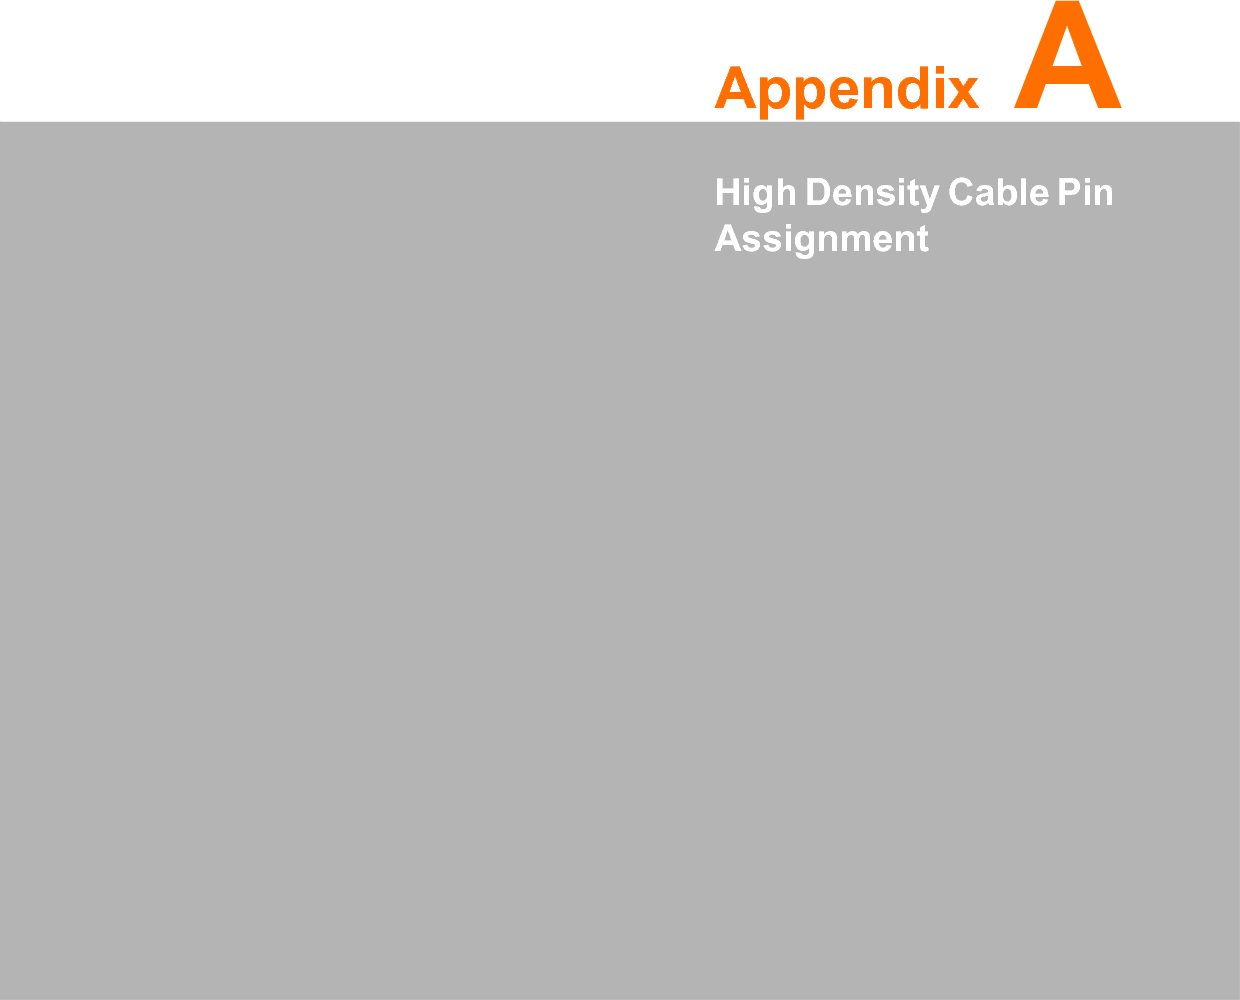 Appendix AAHigh Density Cable Pin Assignment